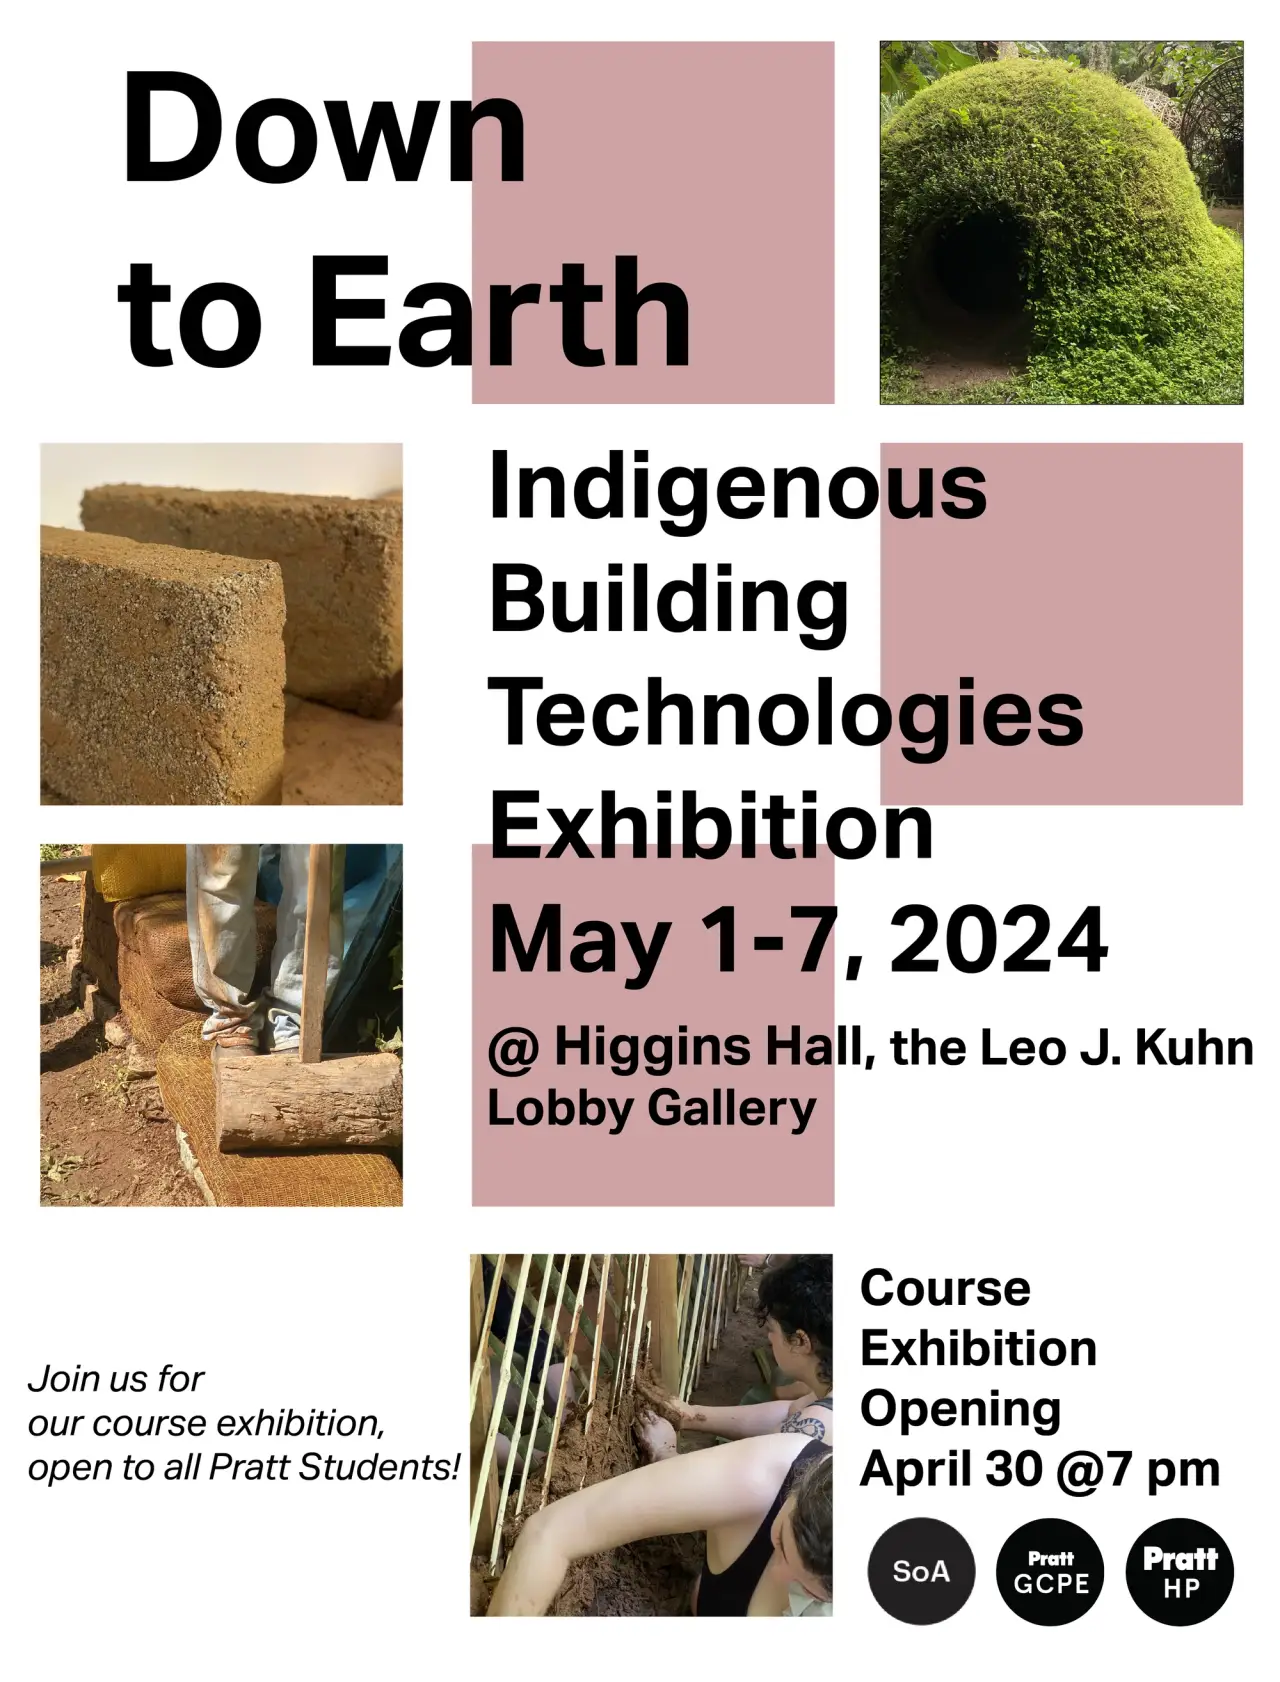 Event Flyer with images of people working with green walls and construction with soil.4